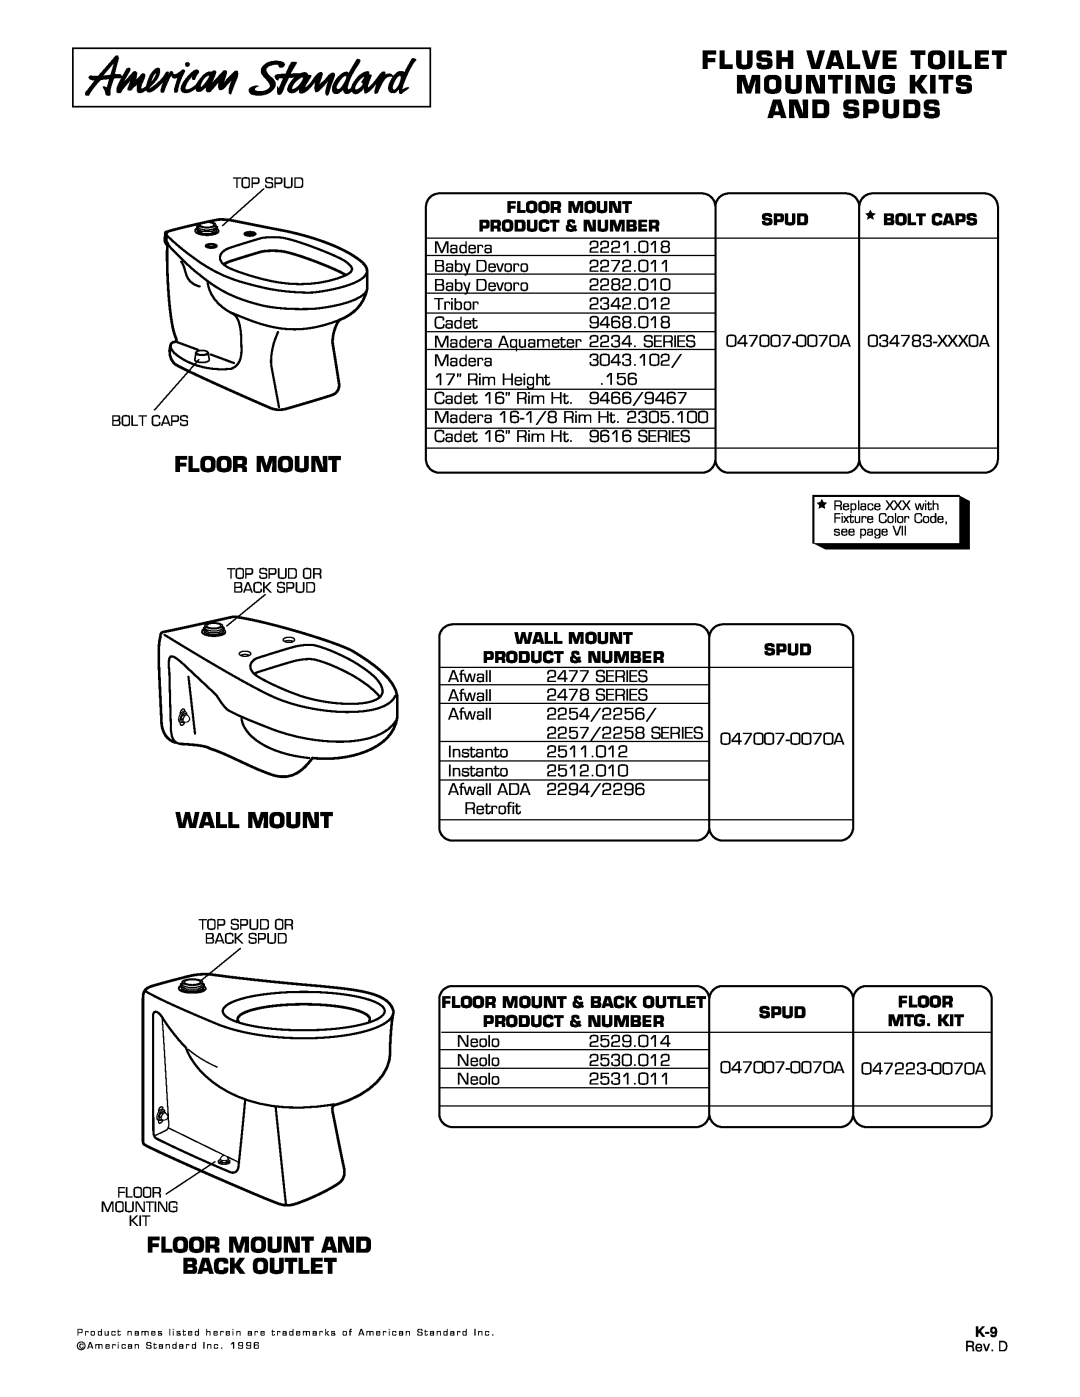 American Standard 2342.012, 9468.018, 2282.010 manual Flush Valve Toilet Mounting Kits And Spuds, Floor Mount, Wall Mount 